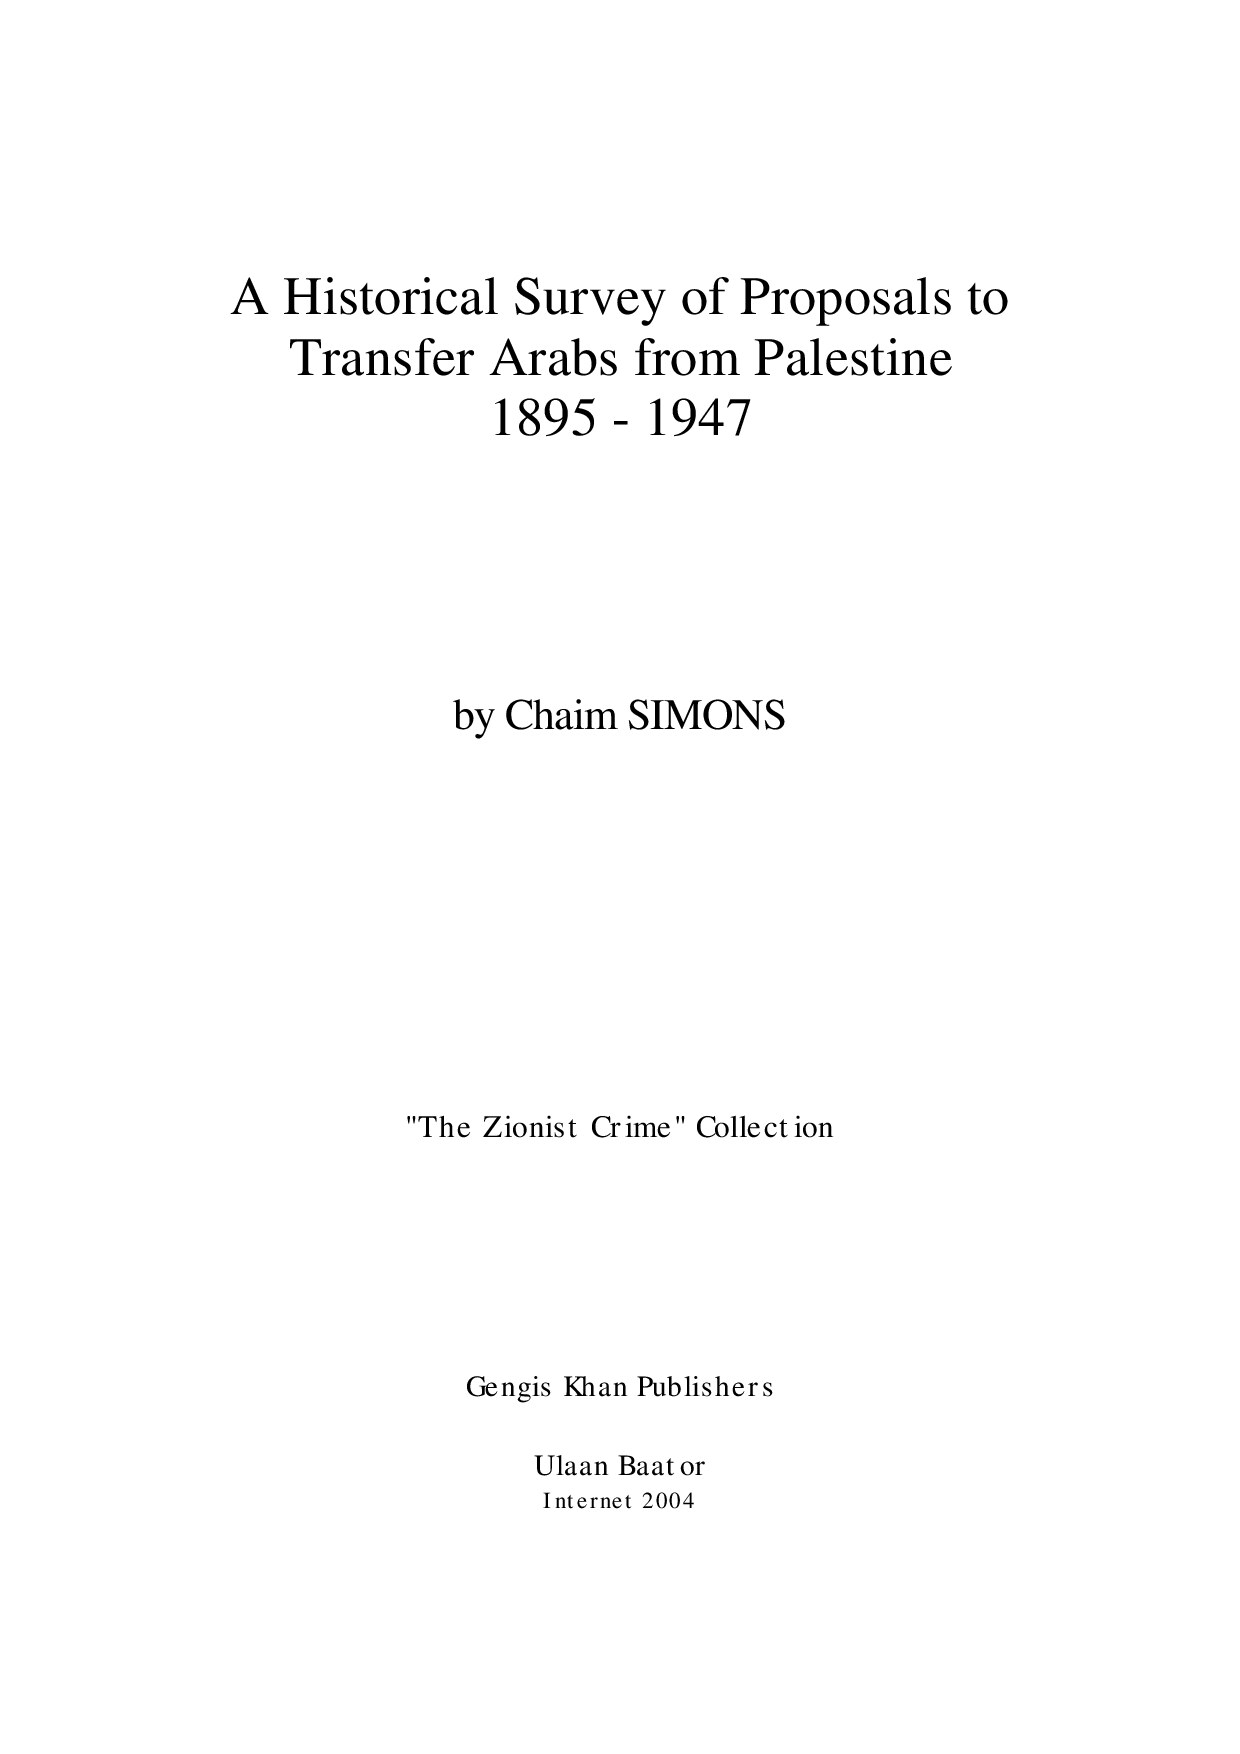 Simons, Chaim; A Historical Survey of Proposals to Transfer Arabs from Palestine 1895 - 1947